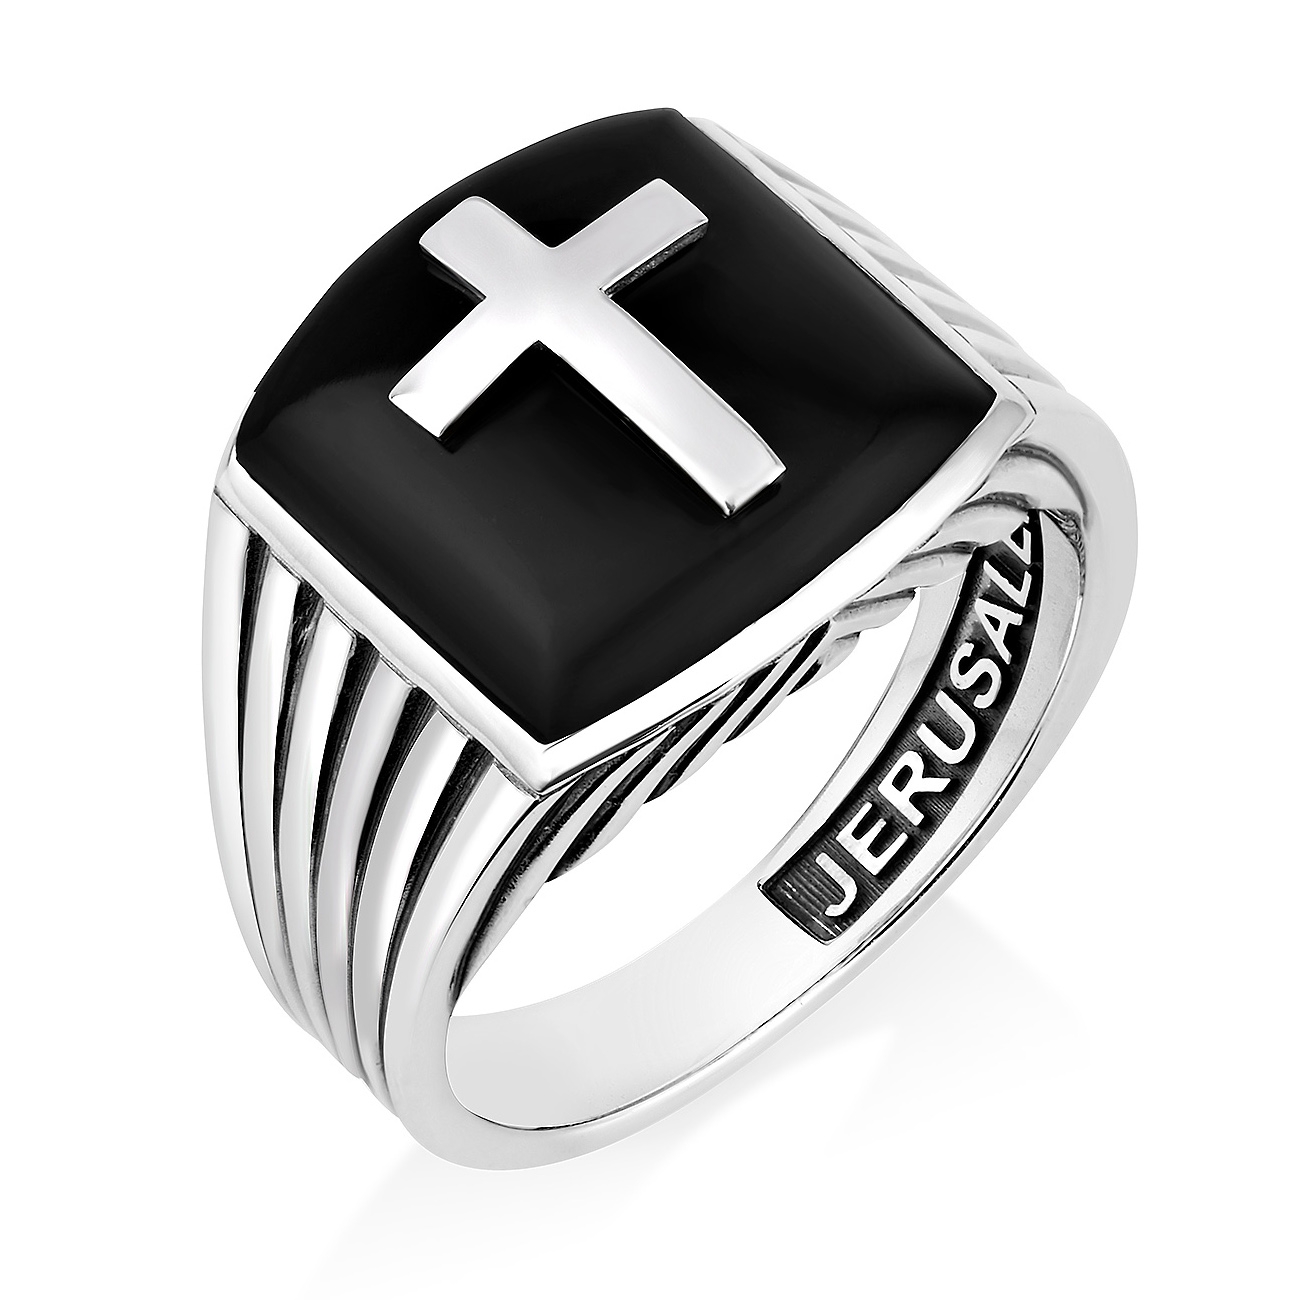 Men's Sterling Silver Latin Cross Ring with Onyx Stone - 1